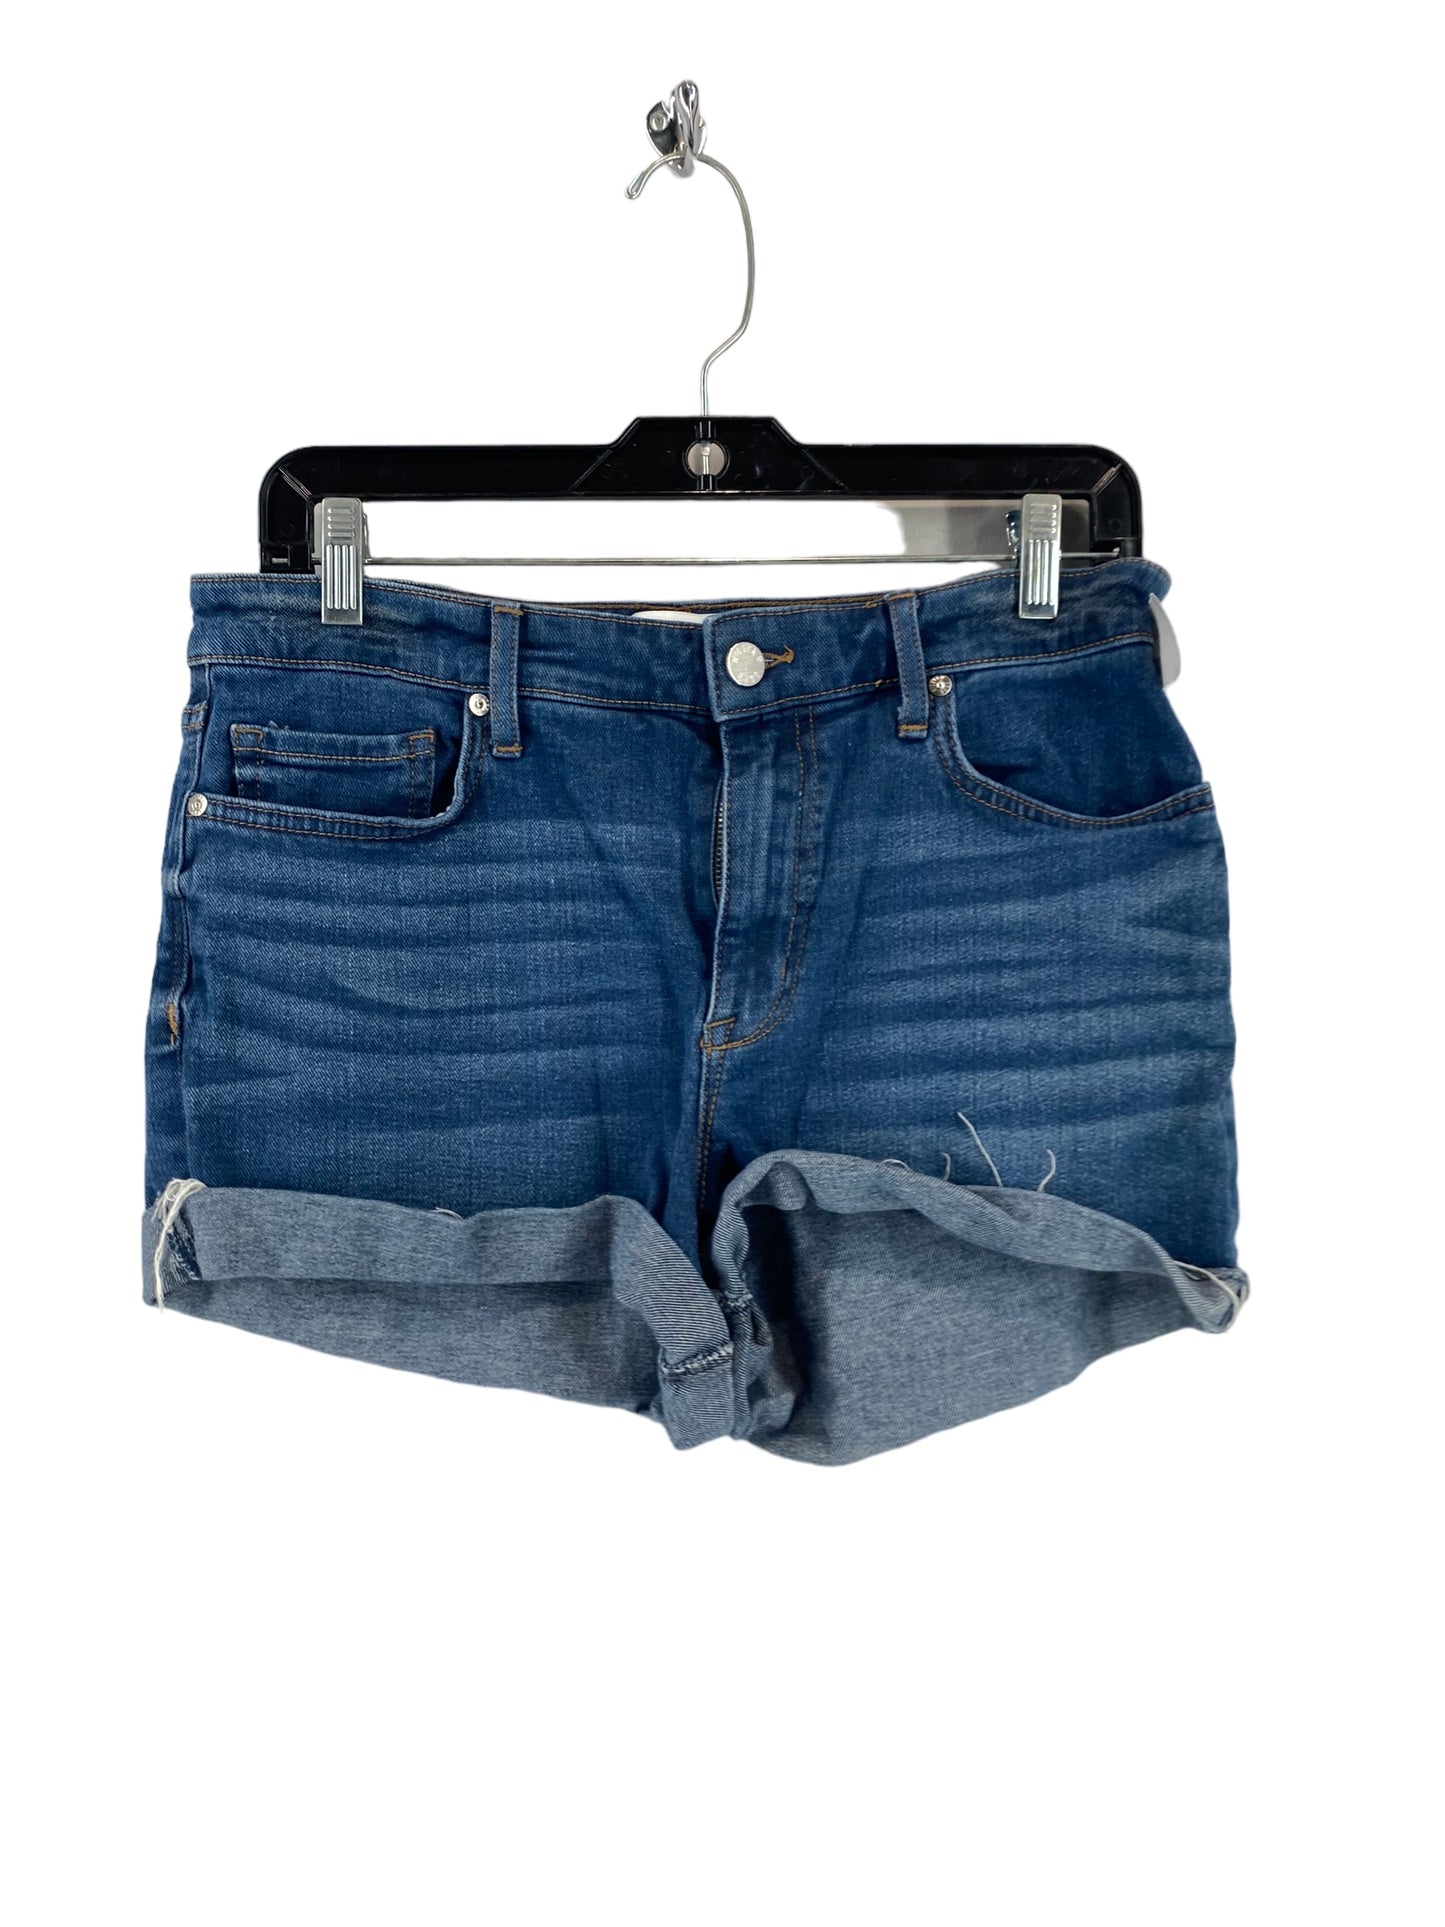 Shorts By William Rast  Size: 30